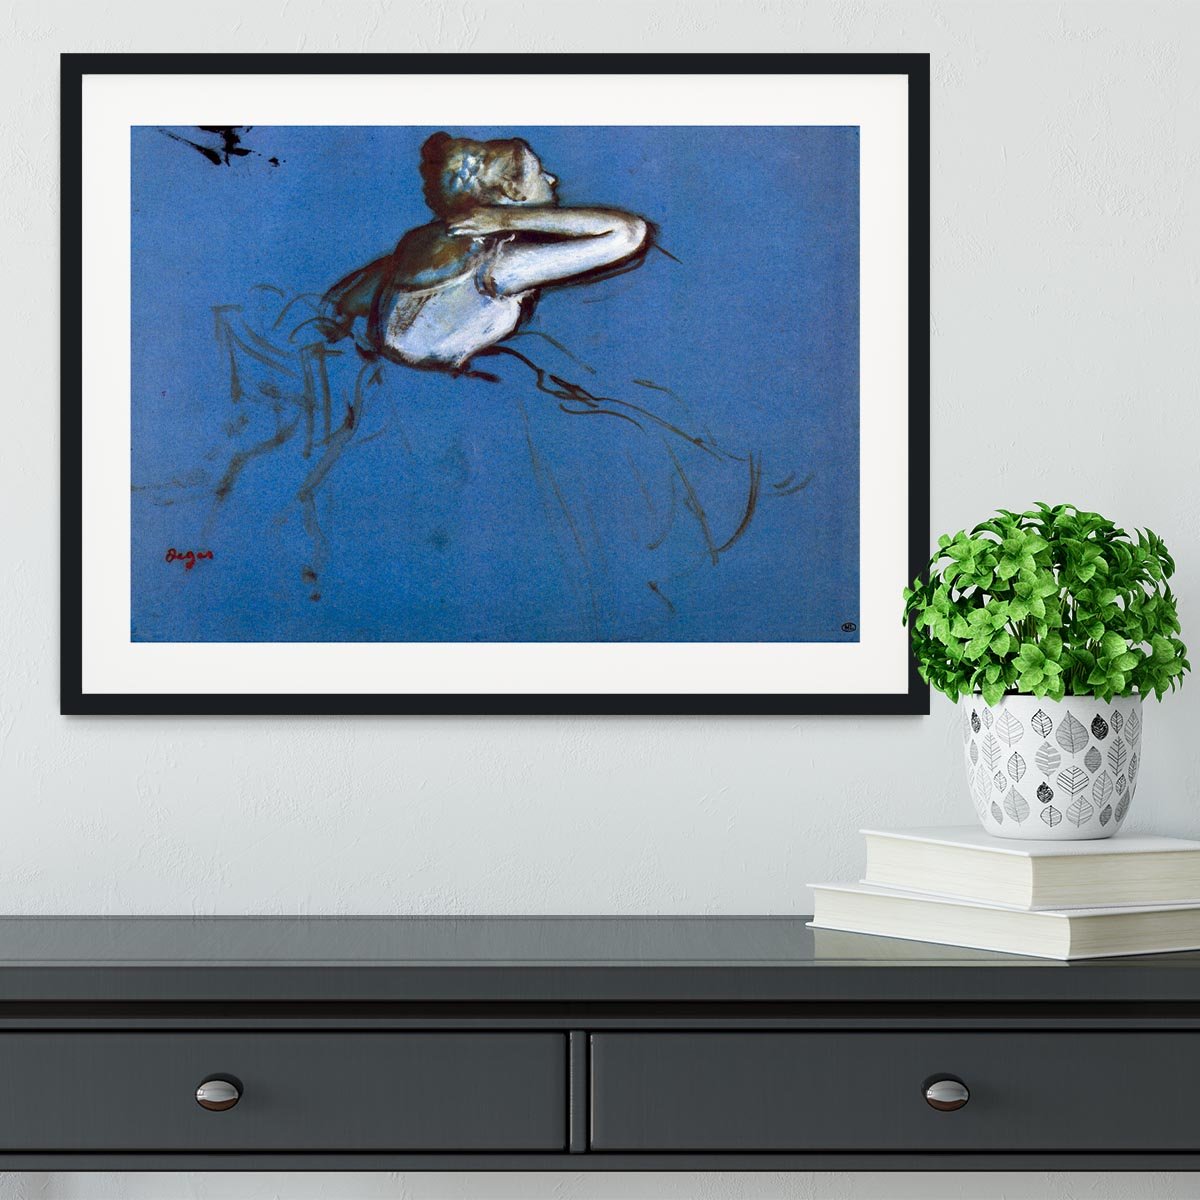 Sitting dancer in profile with hand on her neck by Degas Framed Print - Canvas Art Rocks - 1